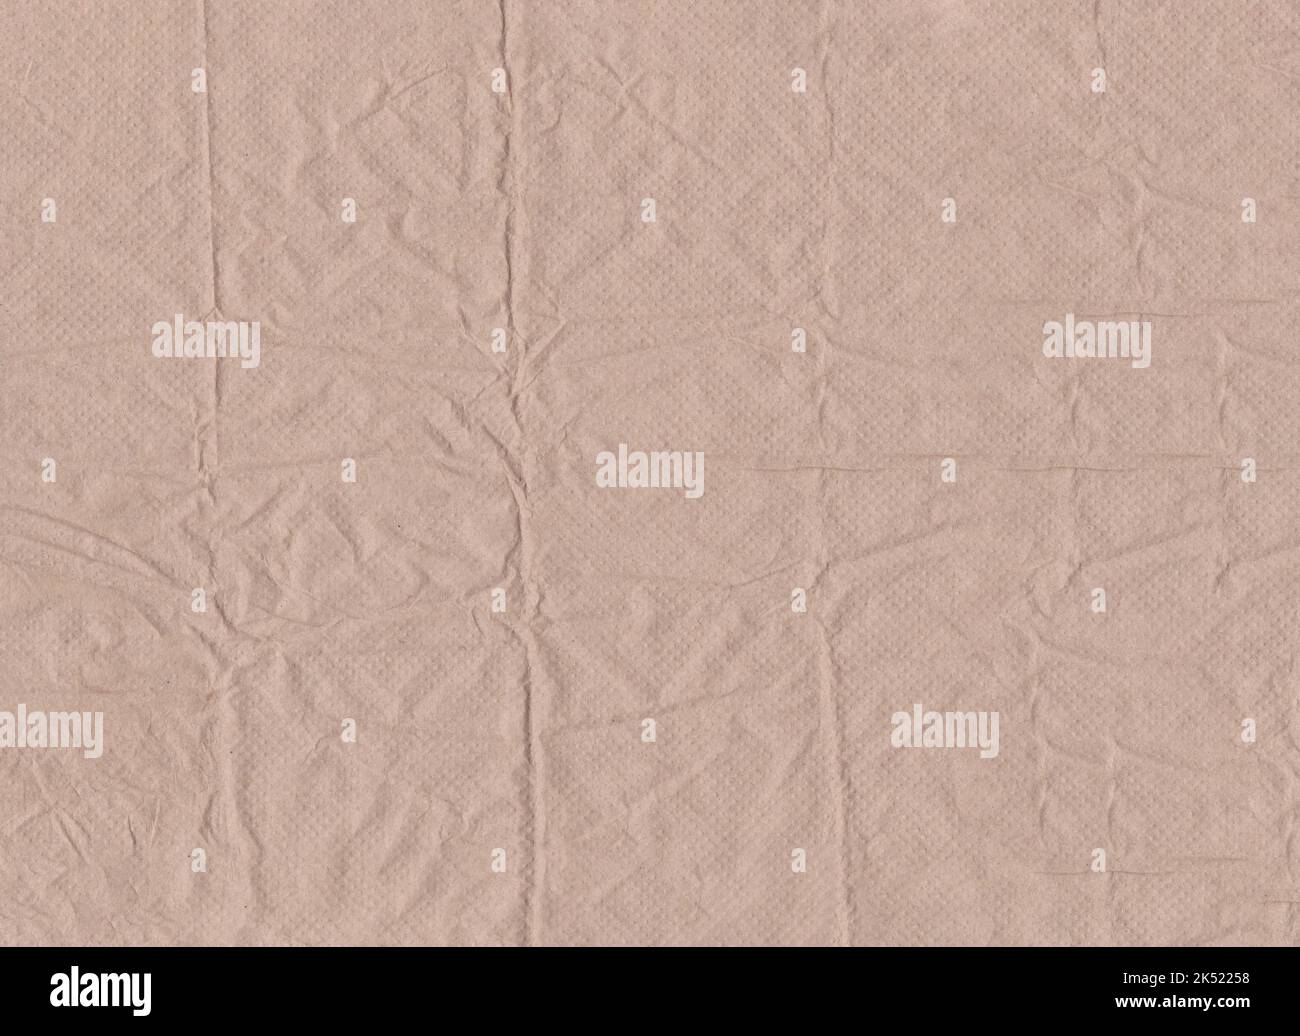 https://c8.alamy.com/comp/2K52258/wrinkled-brown-tissue-paper-background-brown-tissue-paper-with-creases-for-design-in-your-work-2K52258.jpg